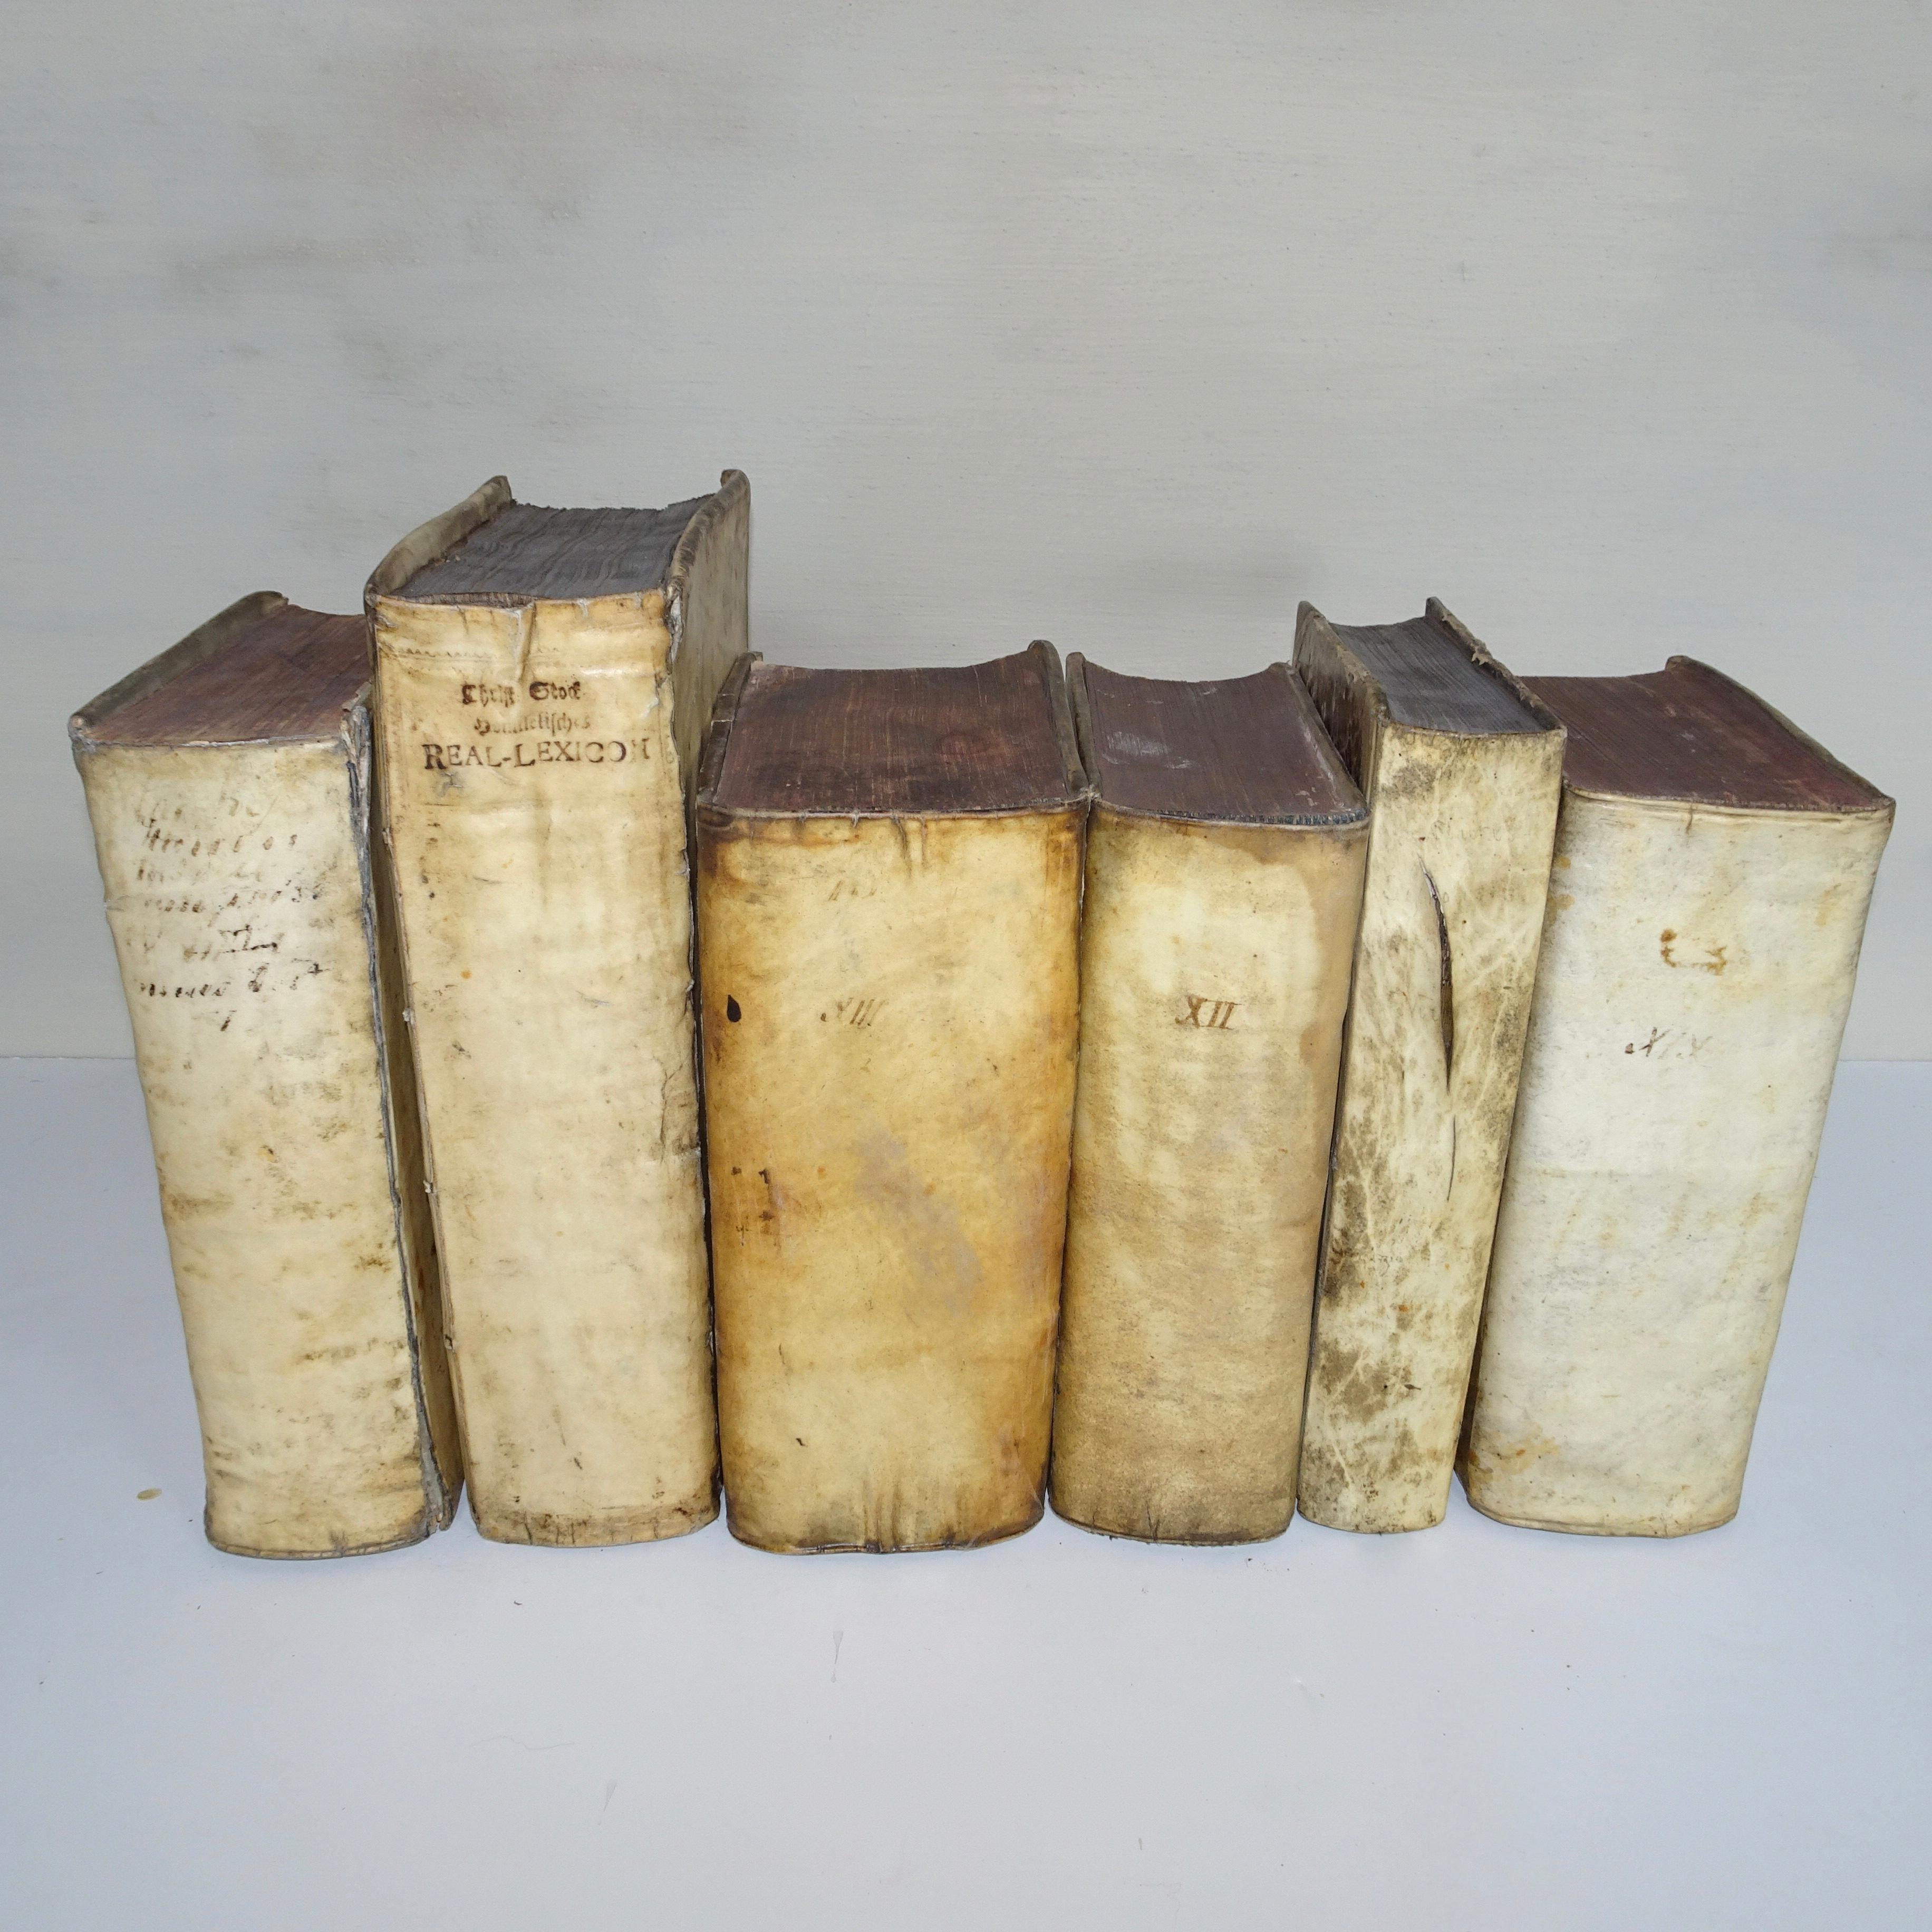 A nice set of all Vellum books in a set of six books from the 17th and 18th century.  All Vellum books are my site are on Sale